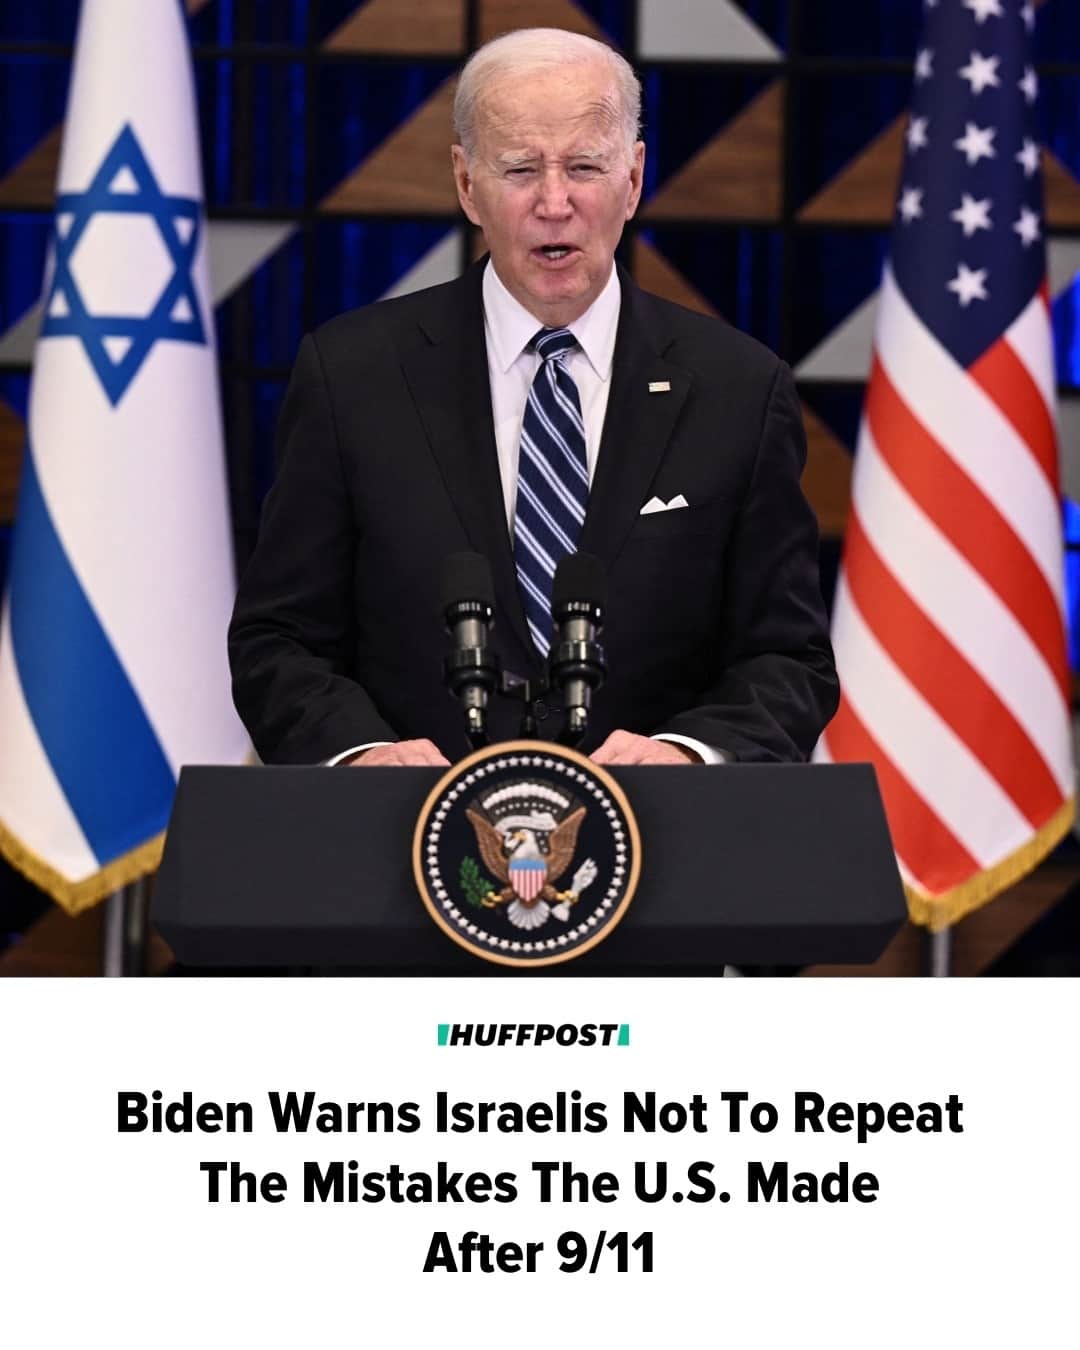 Huffington Postのインスタグラム：「In a speech in Israel, President Joe Biden urged Israelis not to repeat the mistakes the United States made following the 9/11 attacks in Israel’s own response to the Hamas attacks that have reportedly left at least 1,400 Israelis dead since Oct. 7.⁠ ⁠ “I caution this, that while you feel that rage, don’t be consumed by it,” Biden said in public remarks in Tel Aviv. “After 9/11, we were enraged in the United States. While we sought justice and got justice, we also made mistakes.”⁠ ⁠ Biden’s warning about overreaching in response to a traumatic event may be his most explicit call for Israeli restraint in its war on Gaza. It comes, however, as his administration has squashed public communications that mention “de-escalation,” “ceasefire,” “end to violence/bloodshed” and “restoring calm,” according to a HuffPost report. The president has also struck an unflinching pro-Israel stance, moving a carrier strike group off the coast of Israel and promising billions in military aid.⁠ ⁠ Read more at our link in bio. // 📷 Getty // 🖊️ Paul Blumenthal」